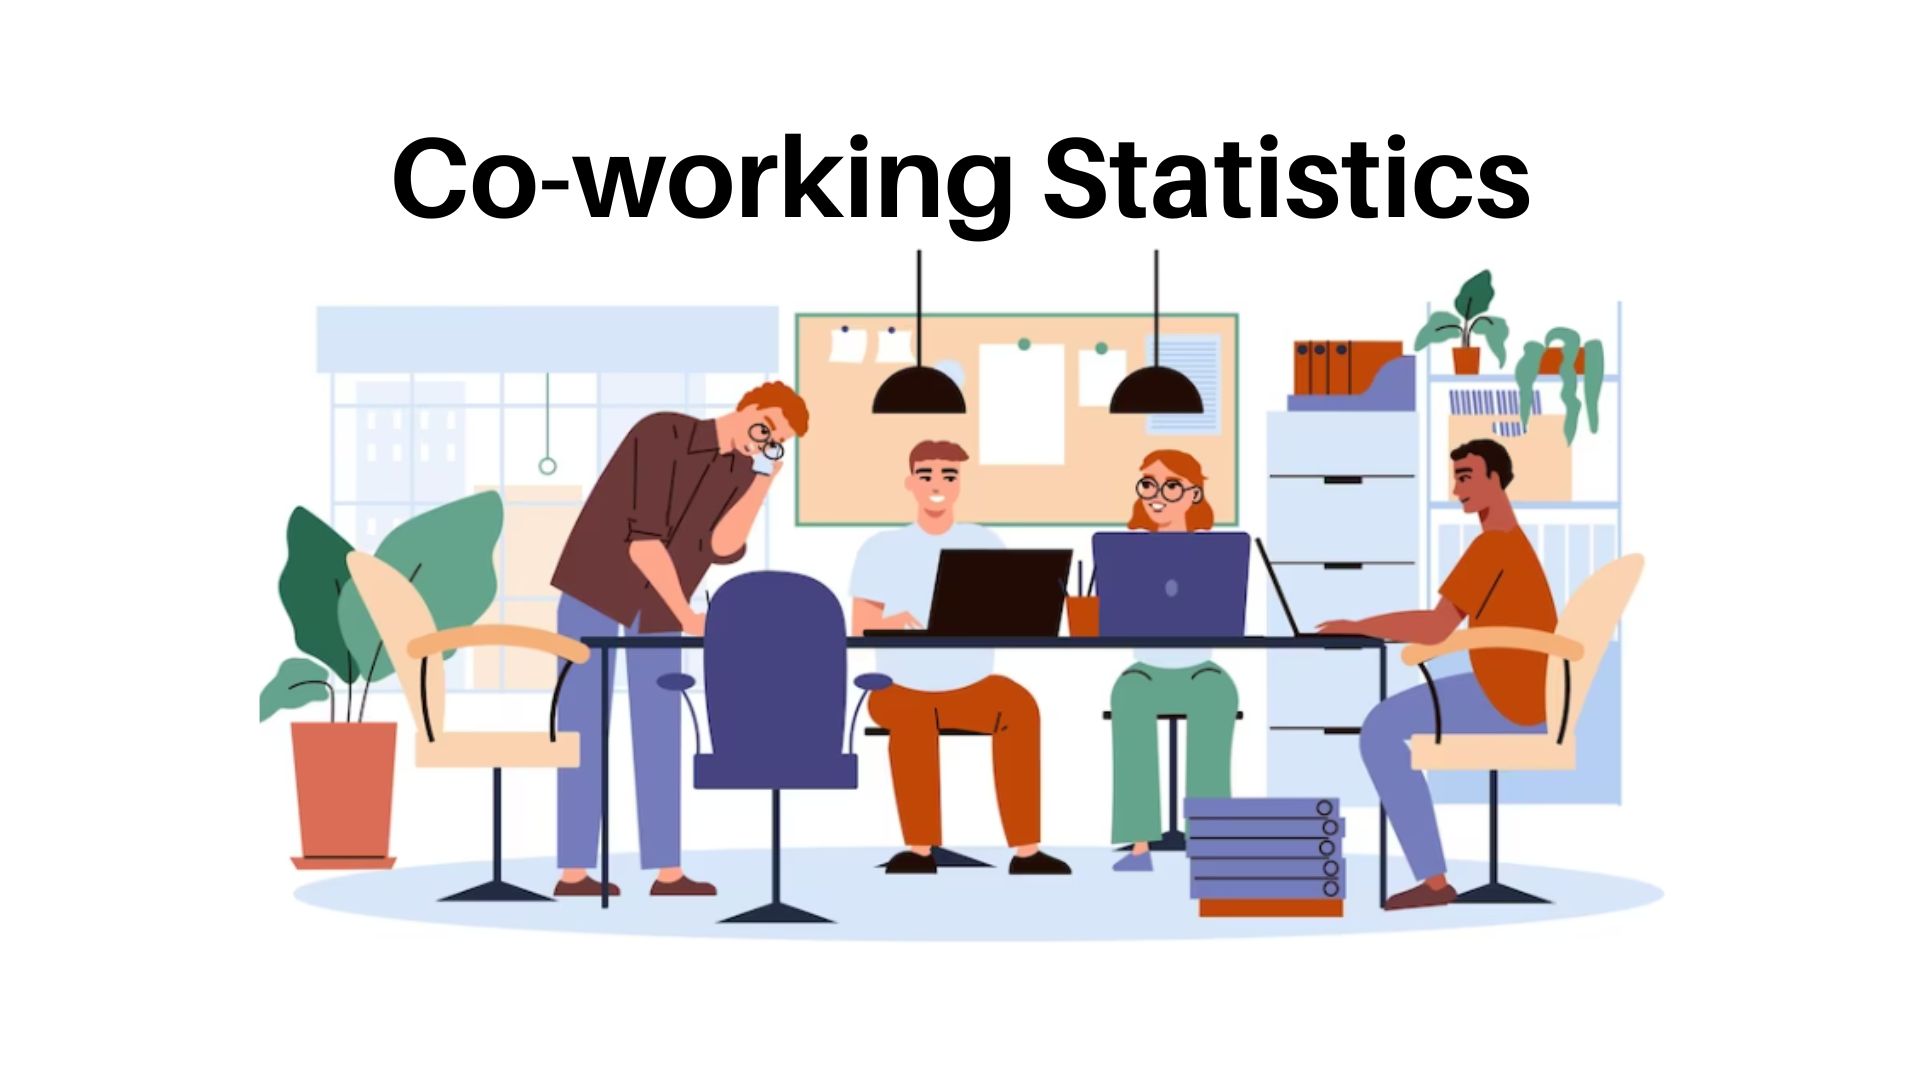 Co-working Statistics By Co-working Benefits, Country, Workers, Demographics, Region and Productivity